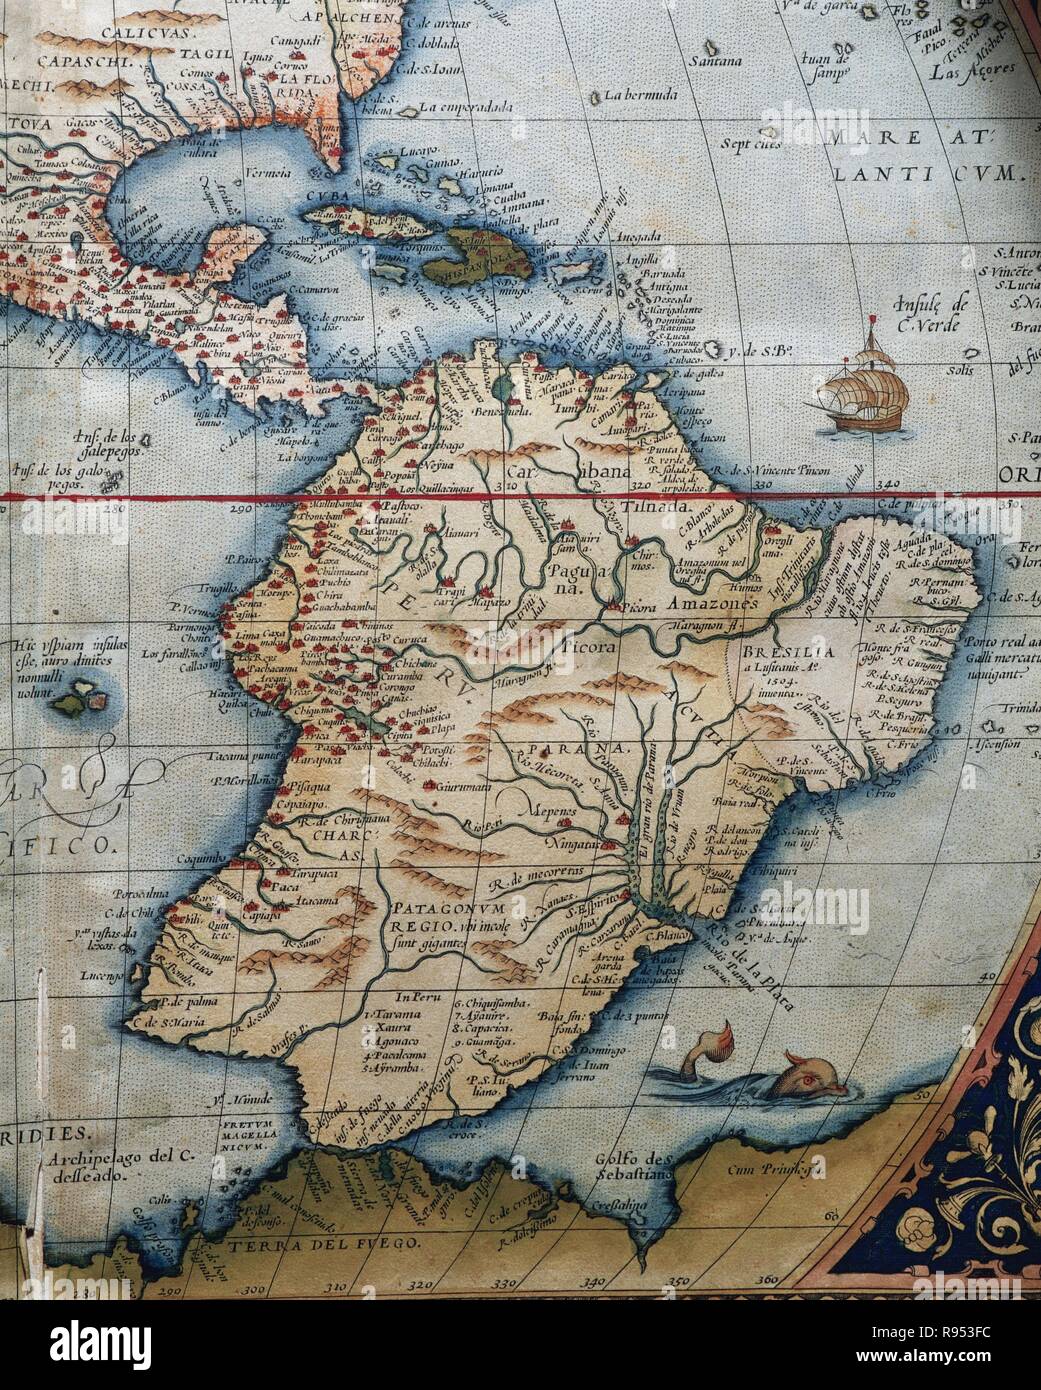 Map of Central and South America. Theatrum Orbis Terrarum by Abraham Ortelius (1527-1598). First Edition. Antwerp, 1574. Stock Photo